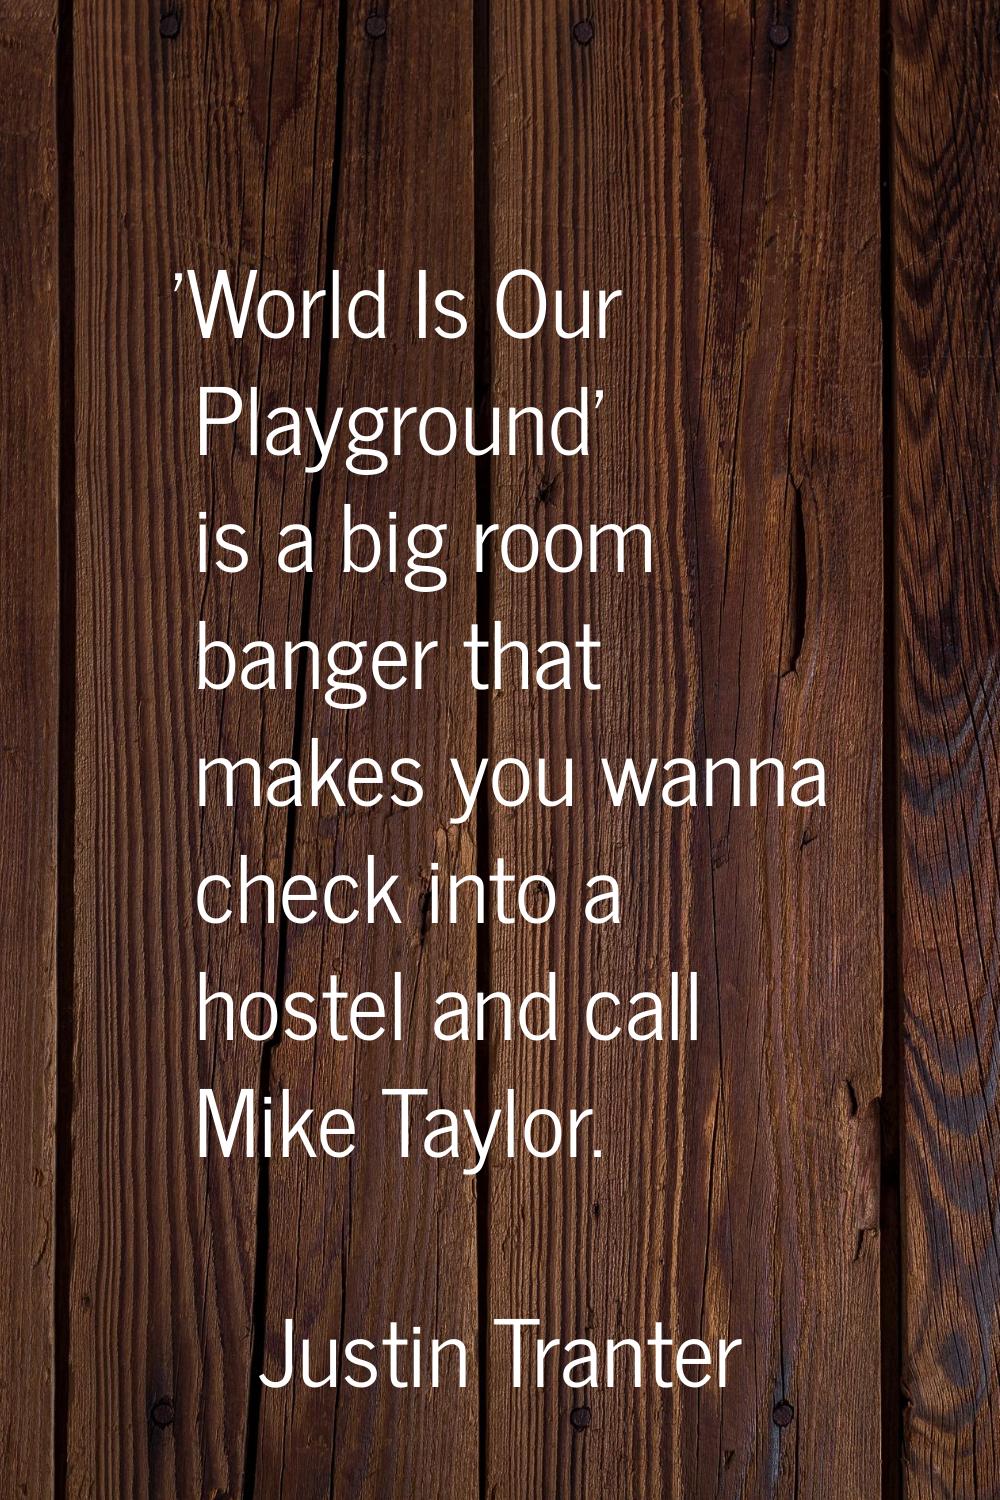 'World Is Our Playground' is a big room banger that makes you wanna check into a hostel and call Mi